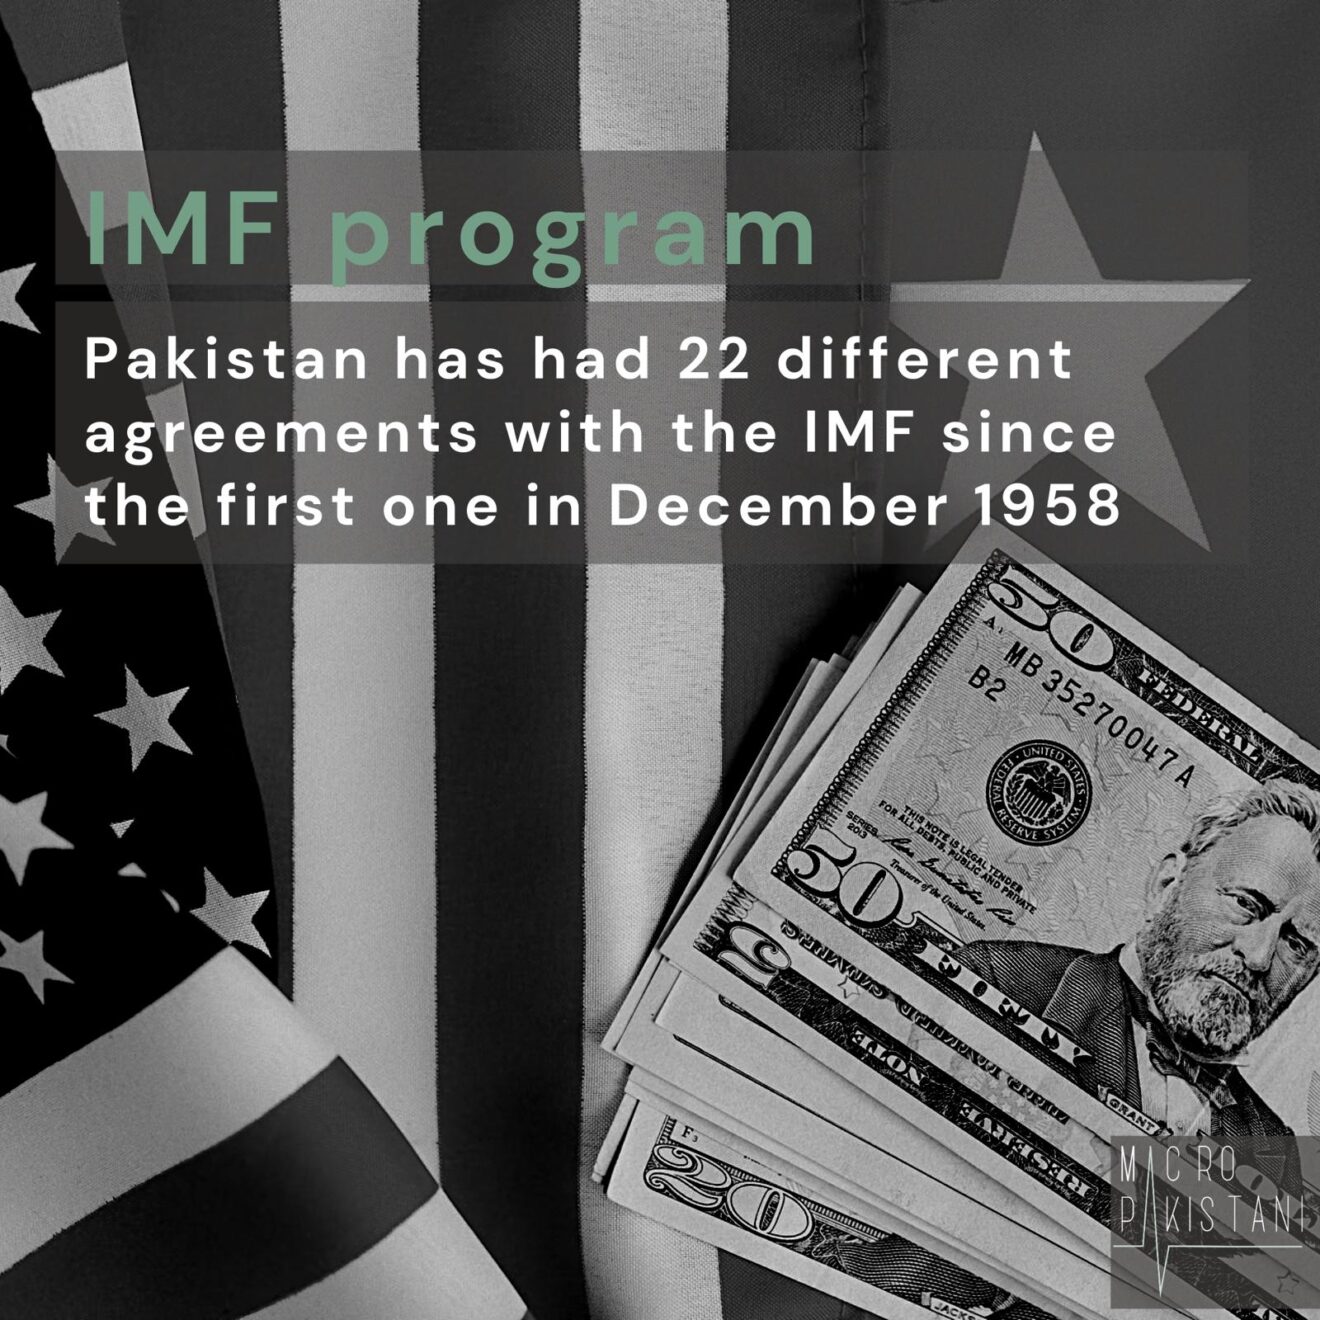 What is the relationship between the IMF and Pakistan?